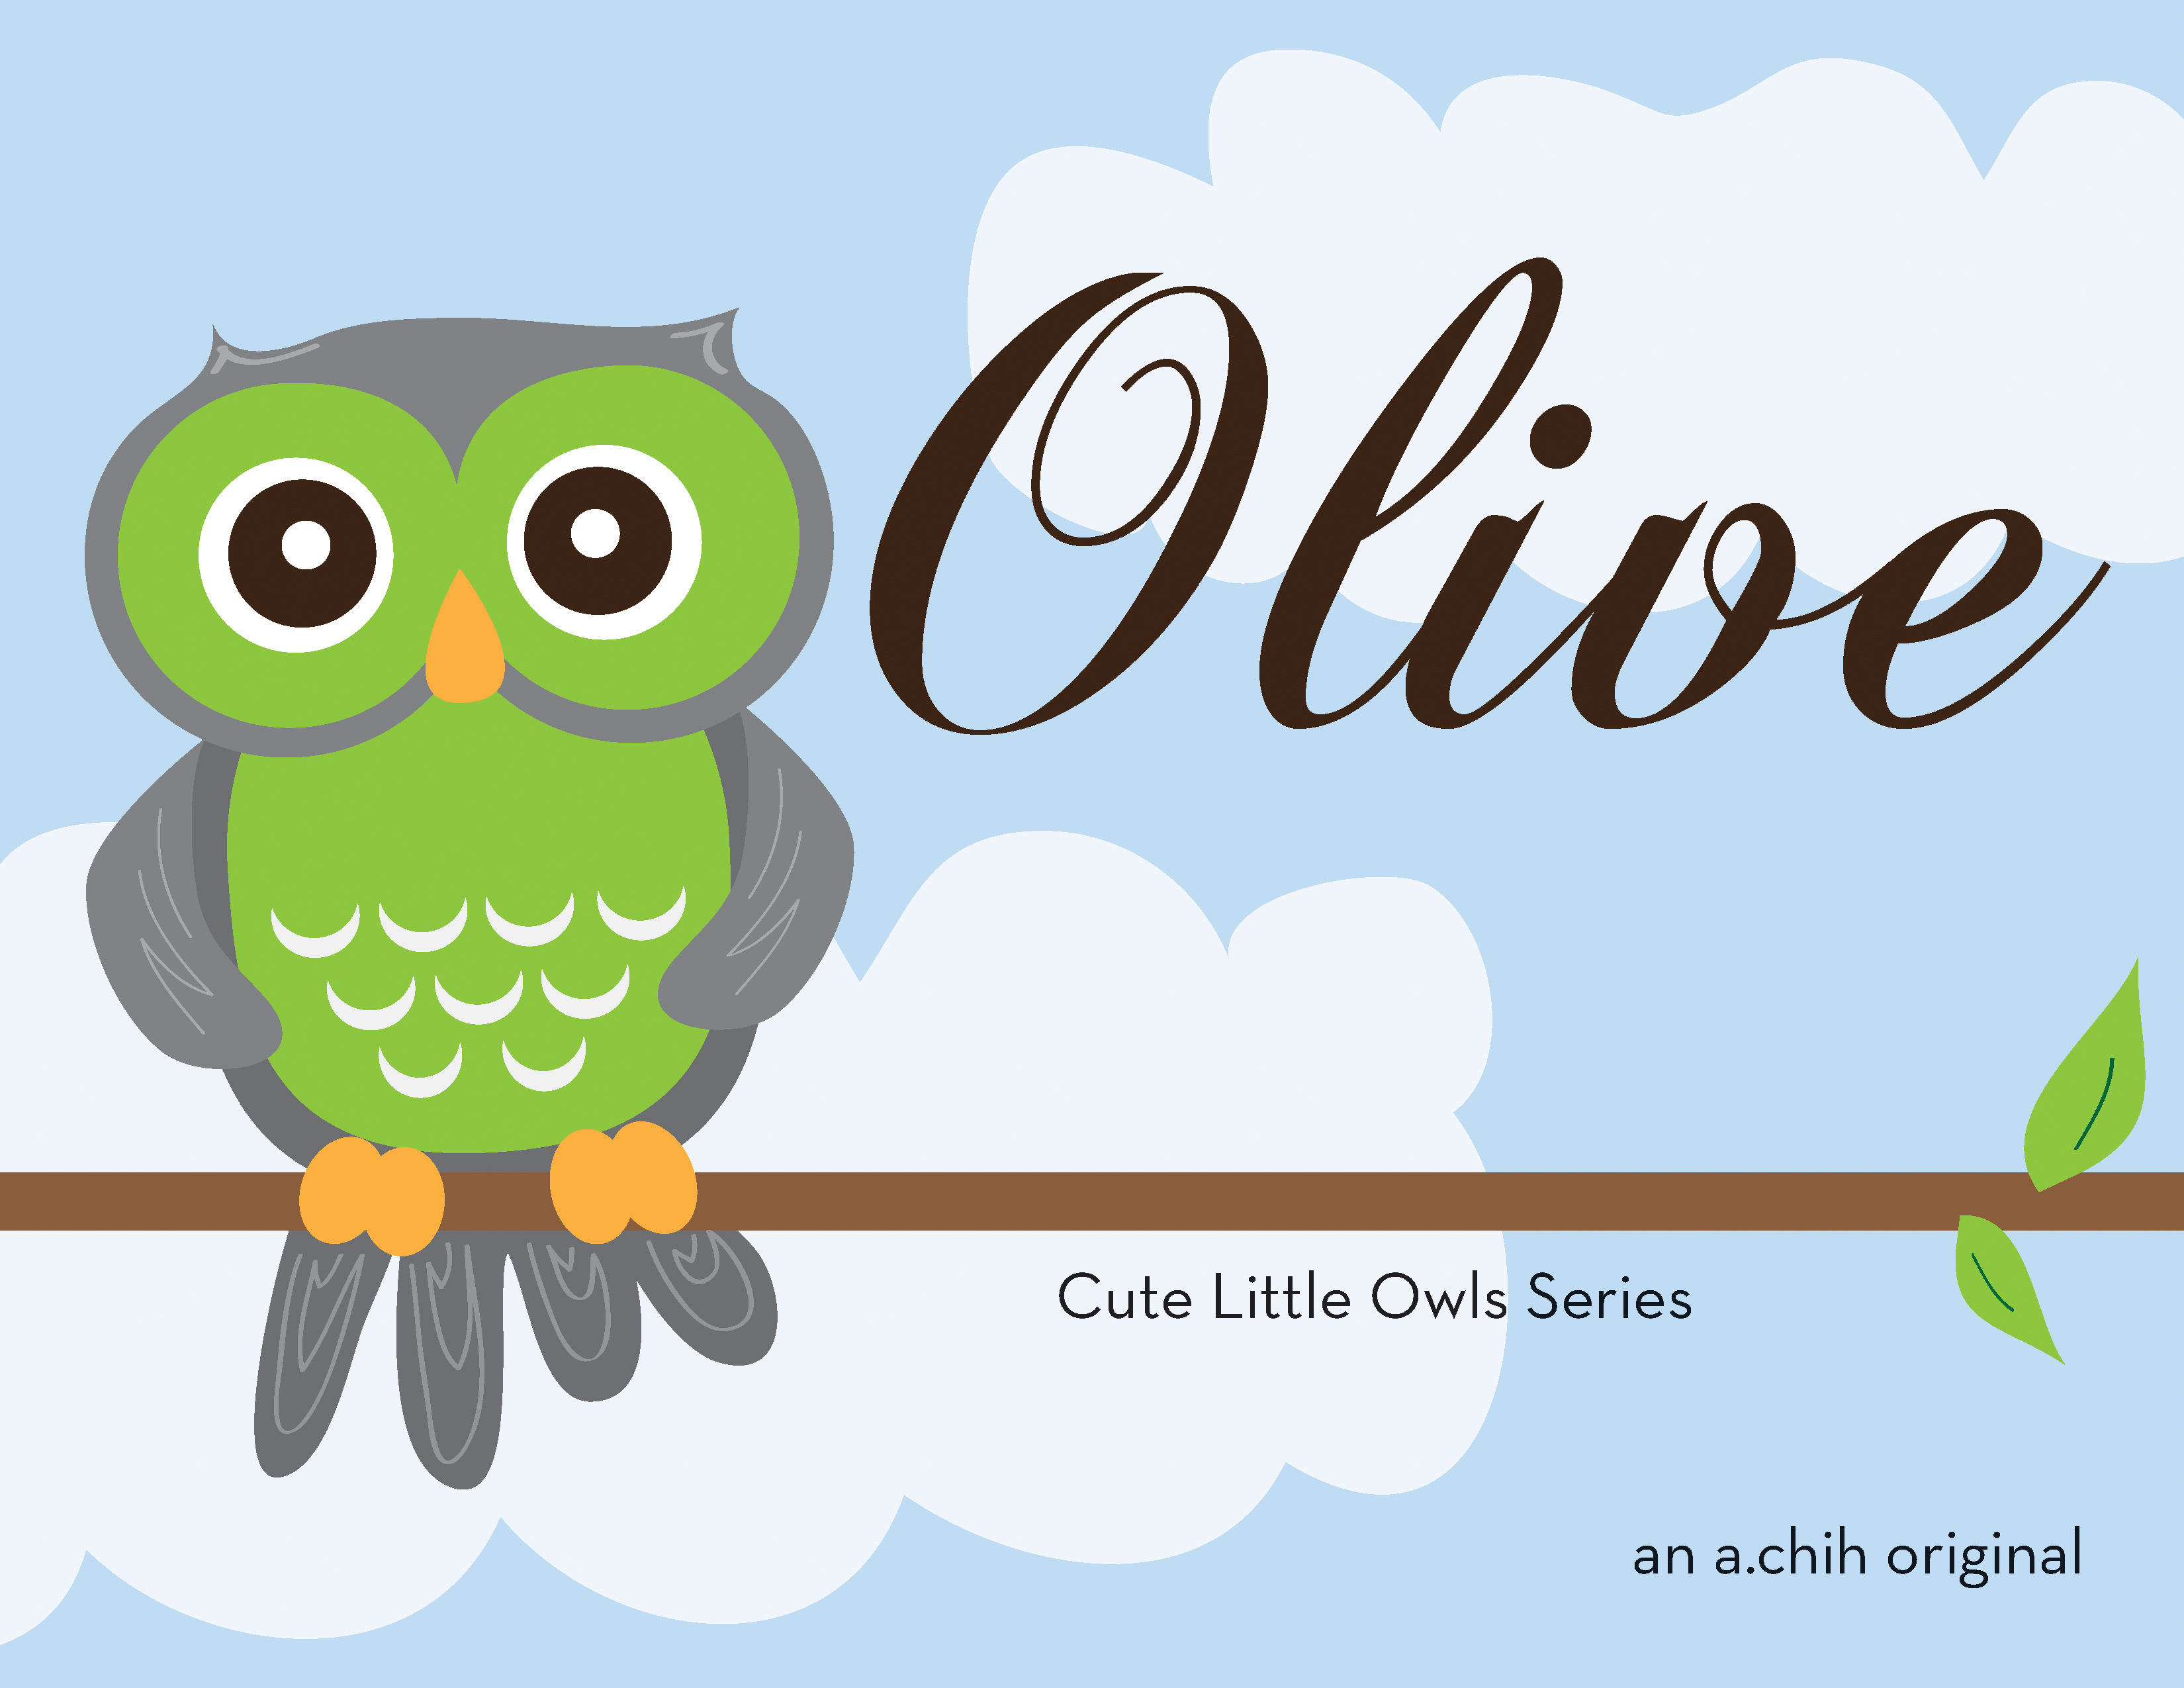 Cover Page of the Cute Little Owls Series - Olive